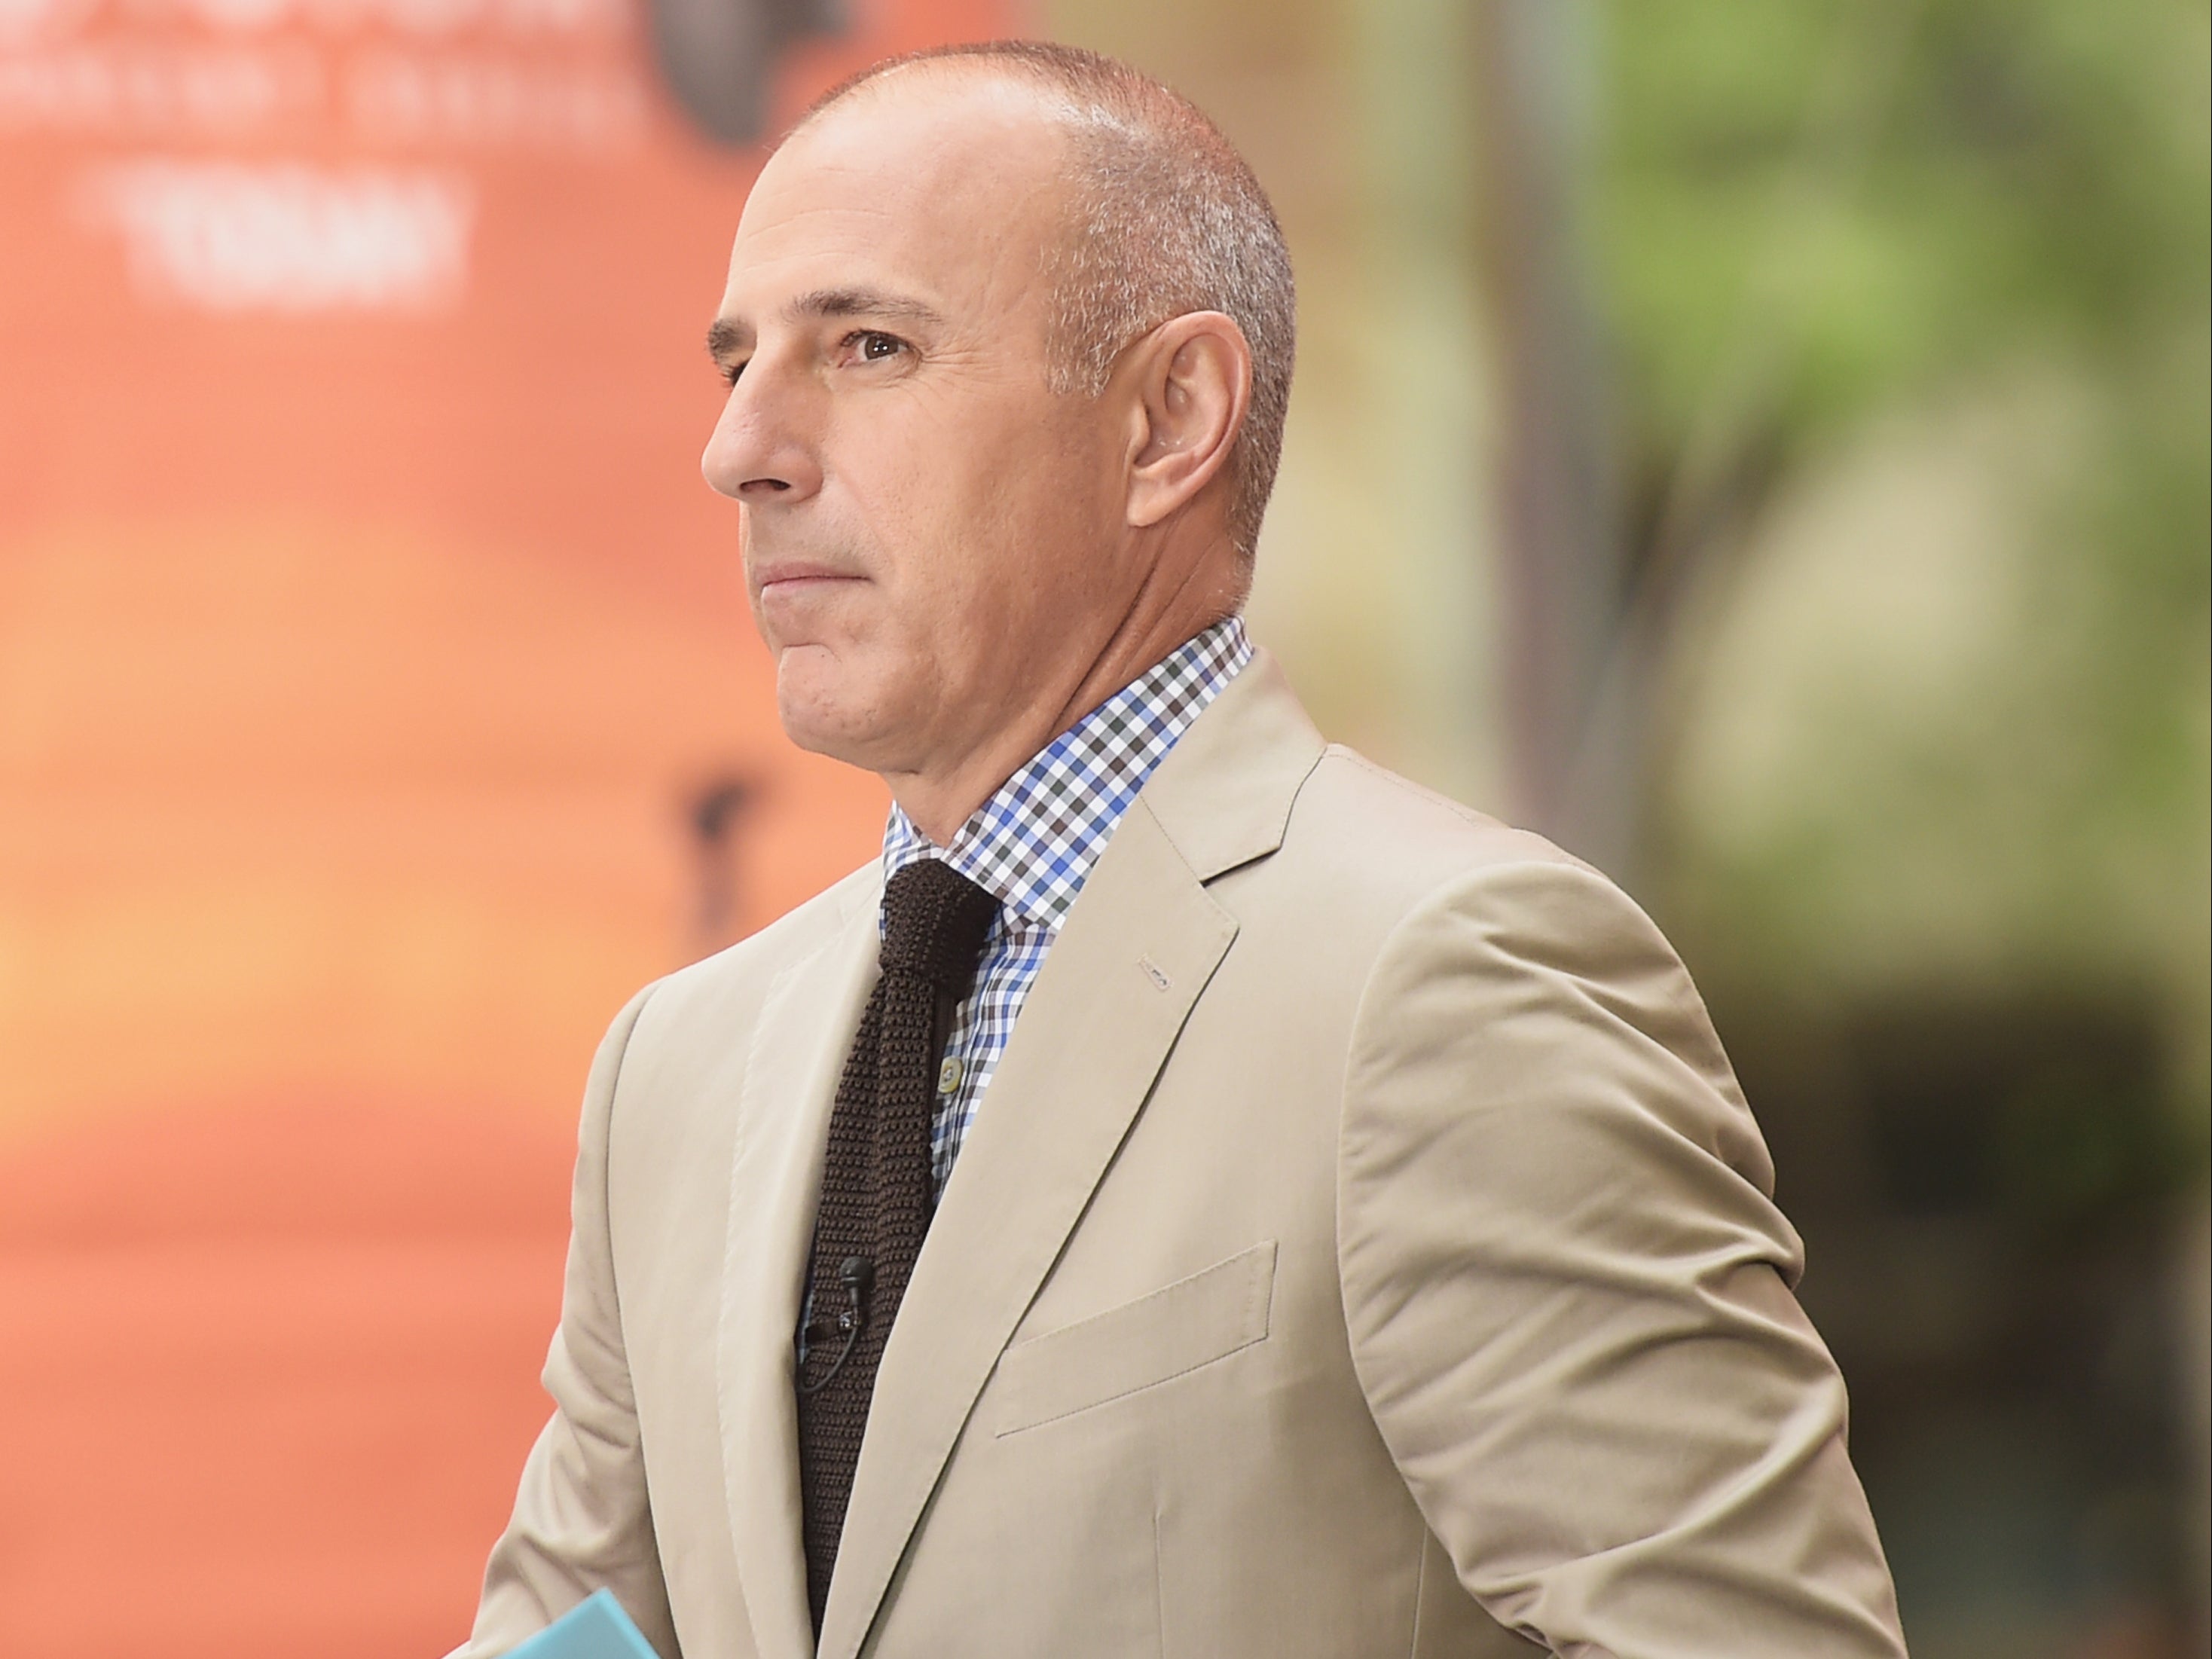 How the Today show handled Matt Lauer in its 70th anniversary